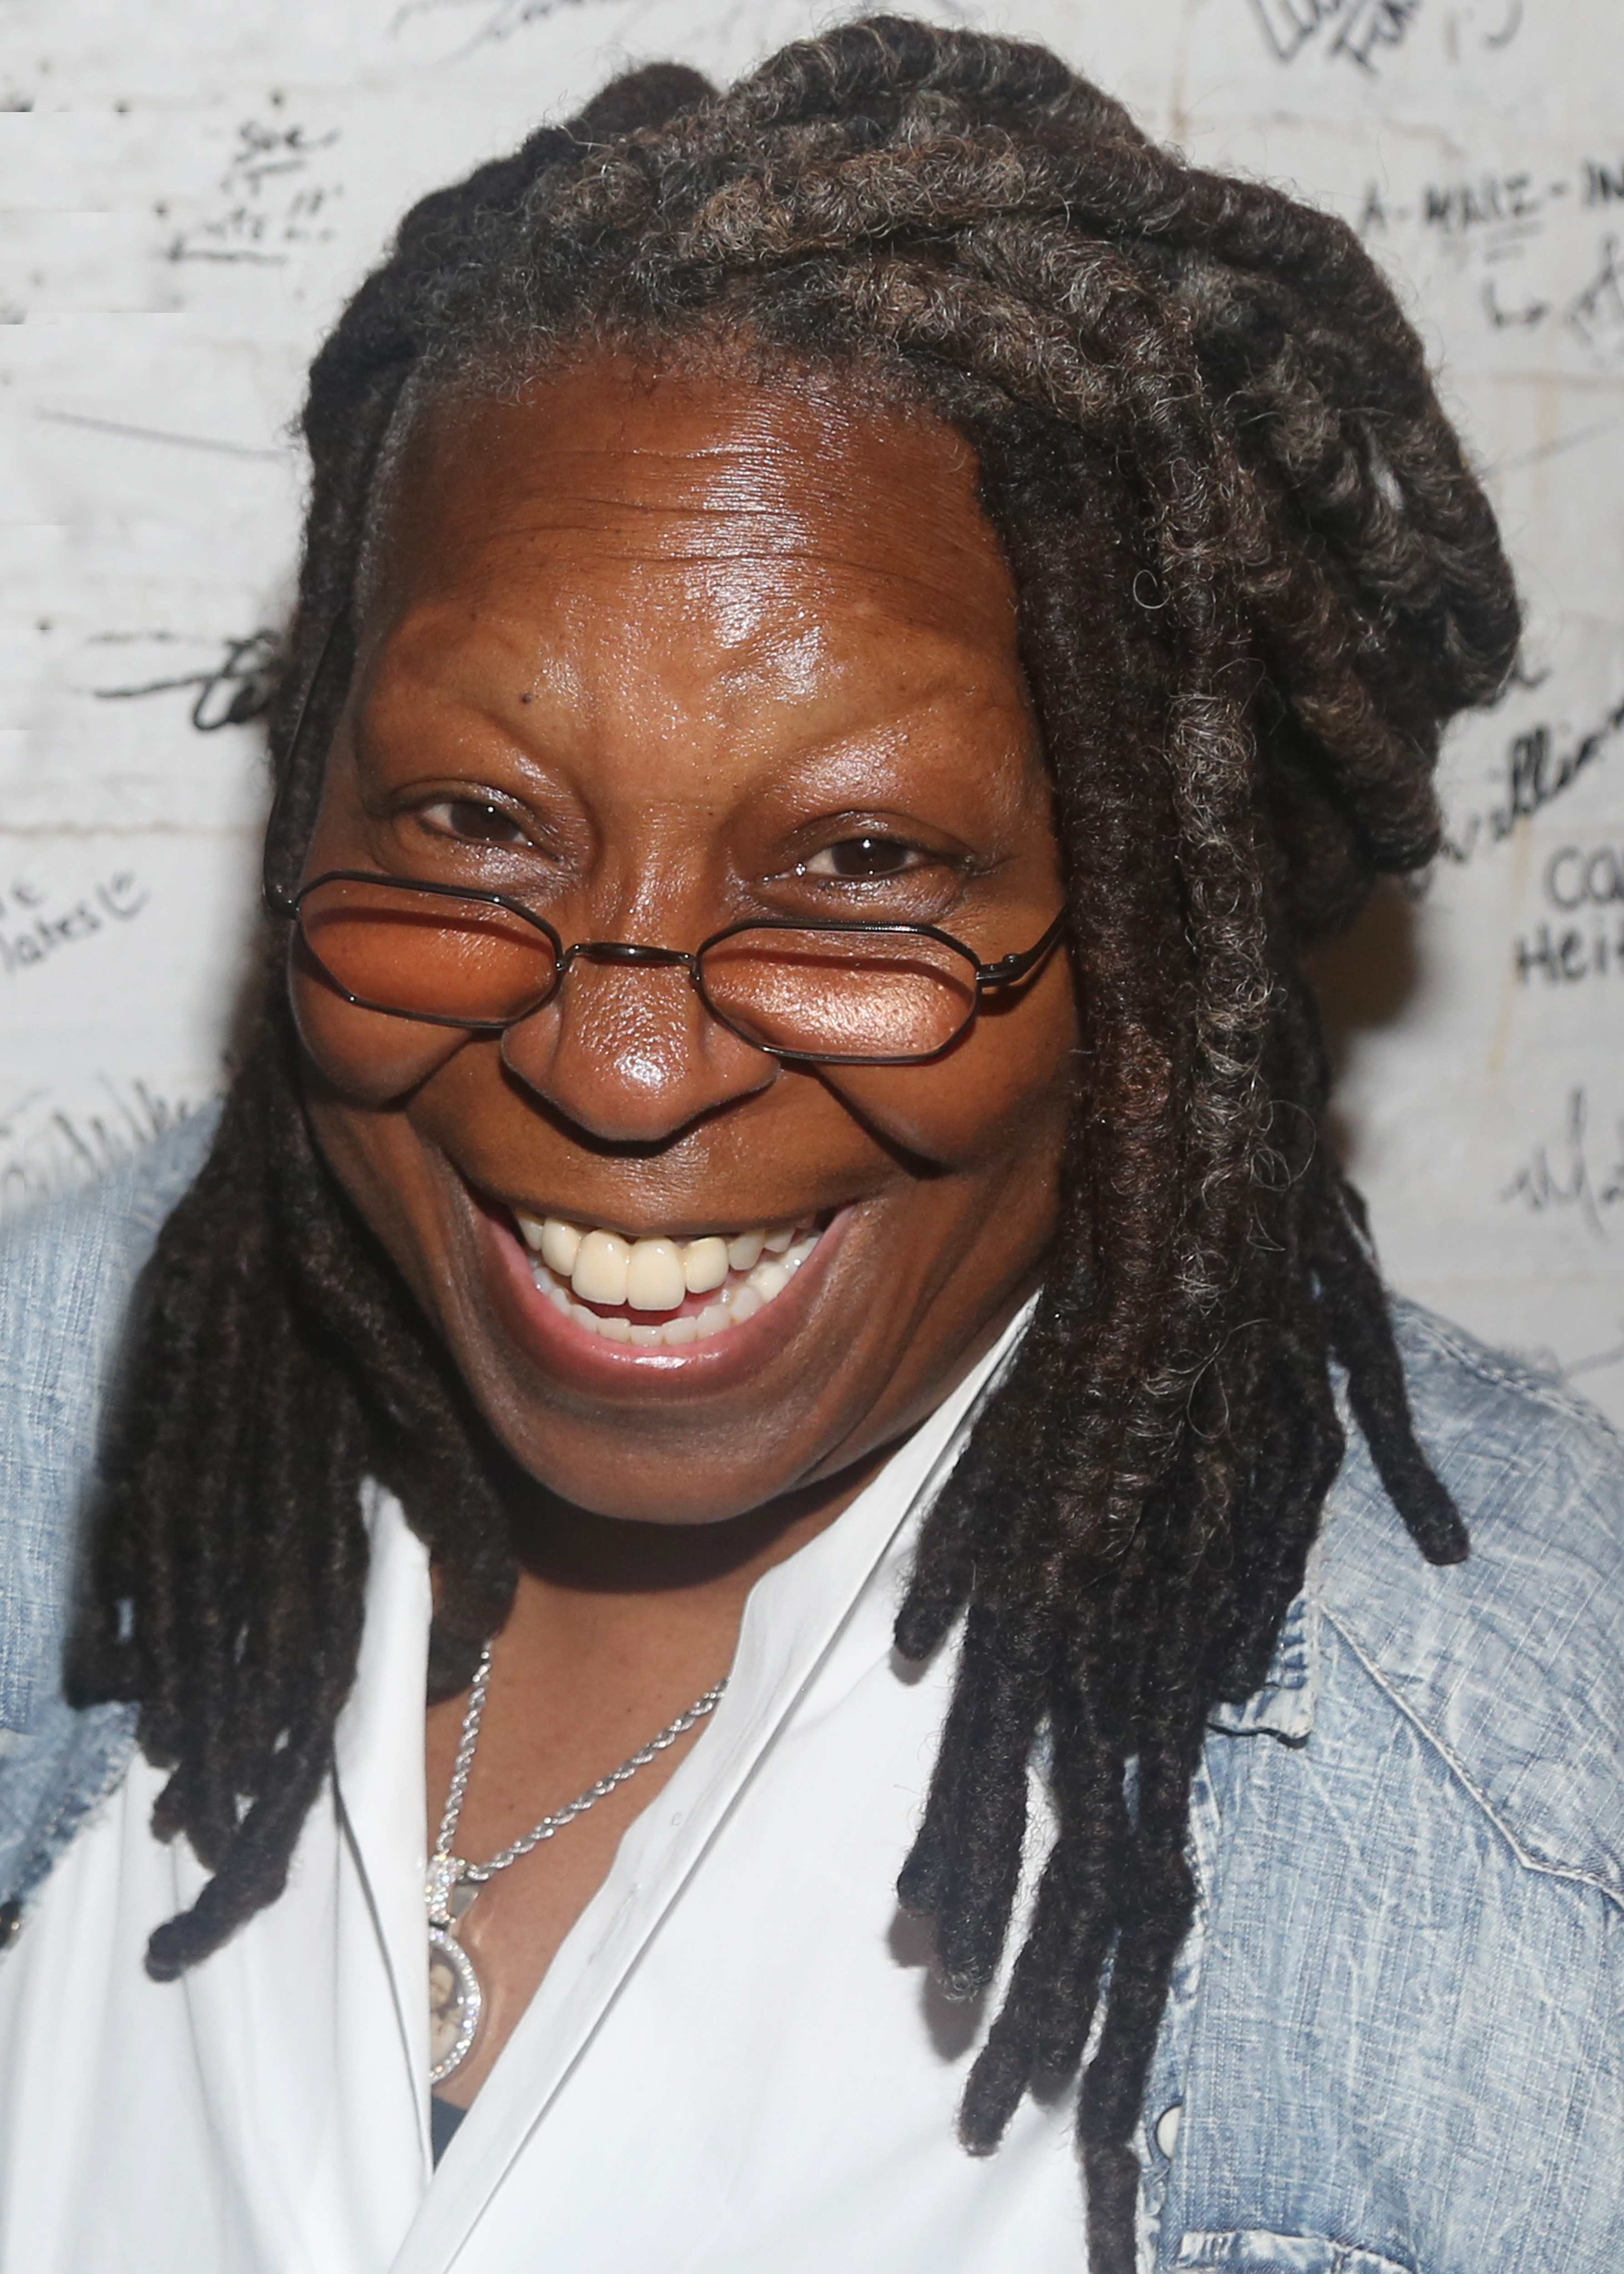 Whoopi Goldberg poses backstage at the musical "Shucked" on Broadway at The Nederlander Theatre on July 30, 2023 in New York City. | Source: Getty Images